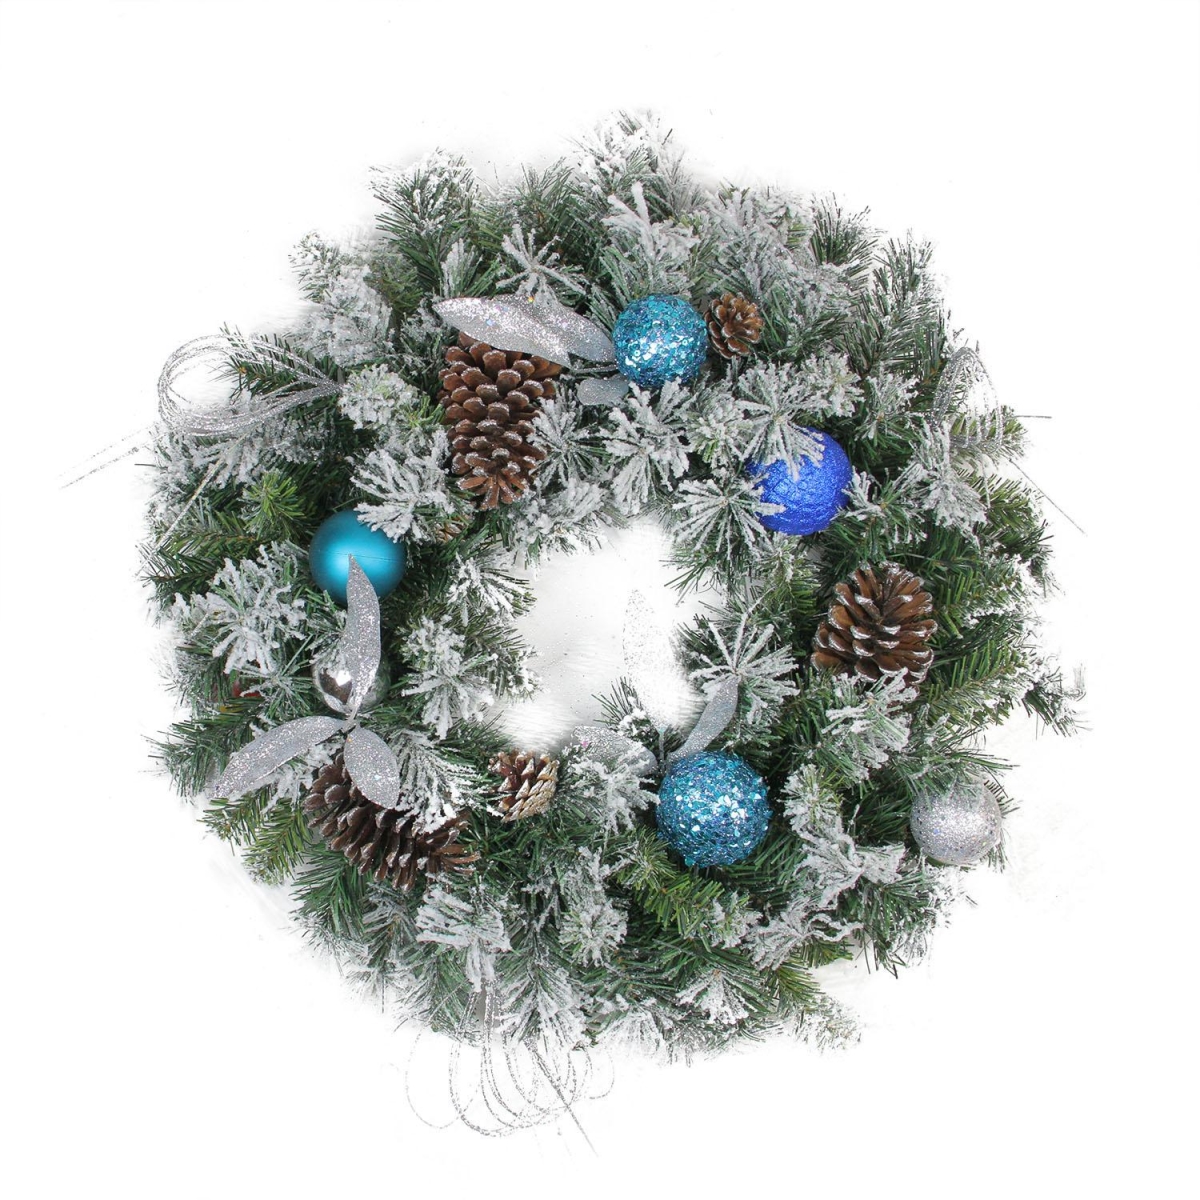 32275673 24 In. Teal & Silver Ball Flocked With Pine Cones Artificial Christmas Wreath - Unlit